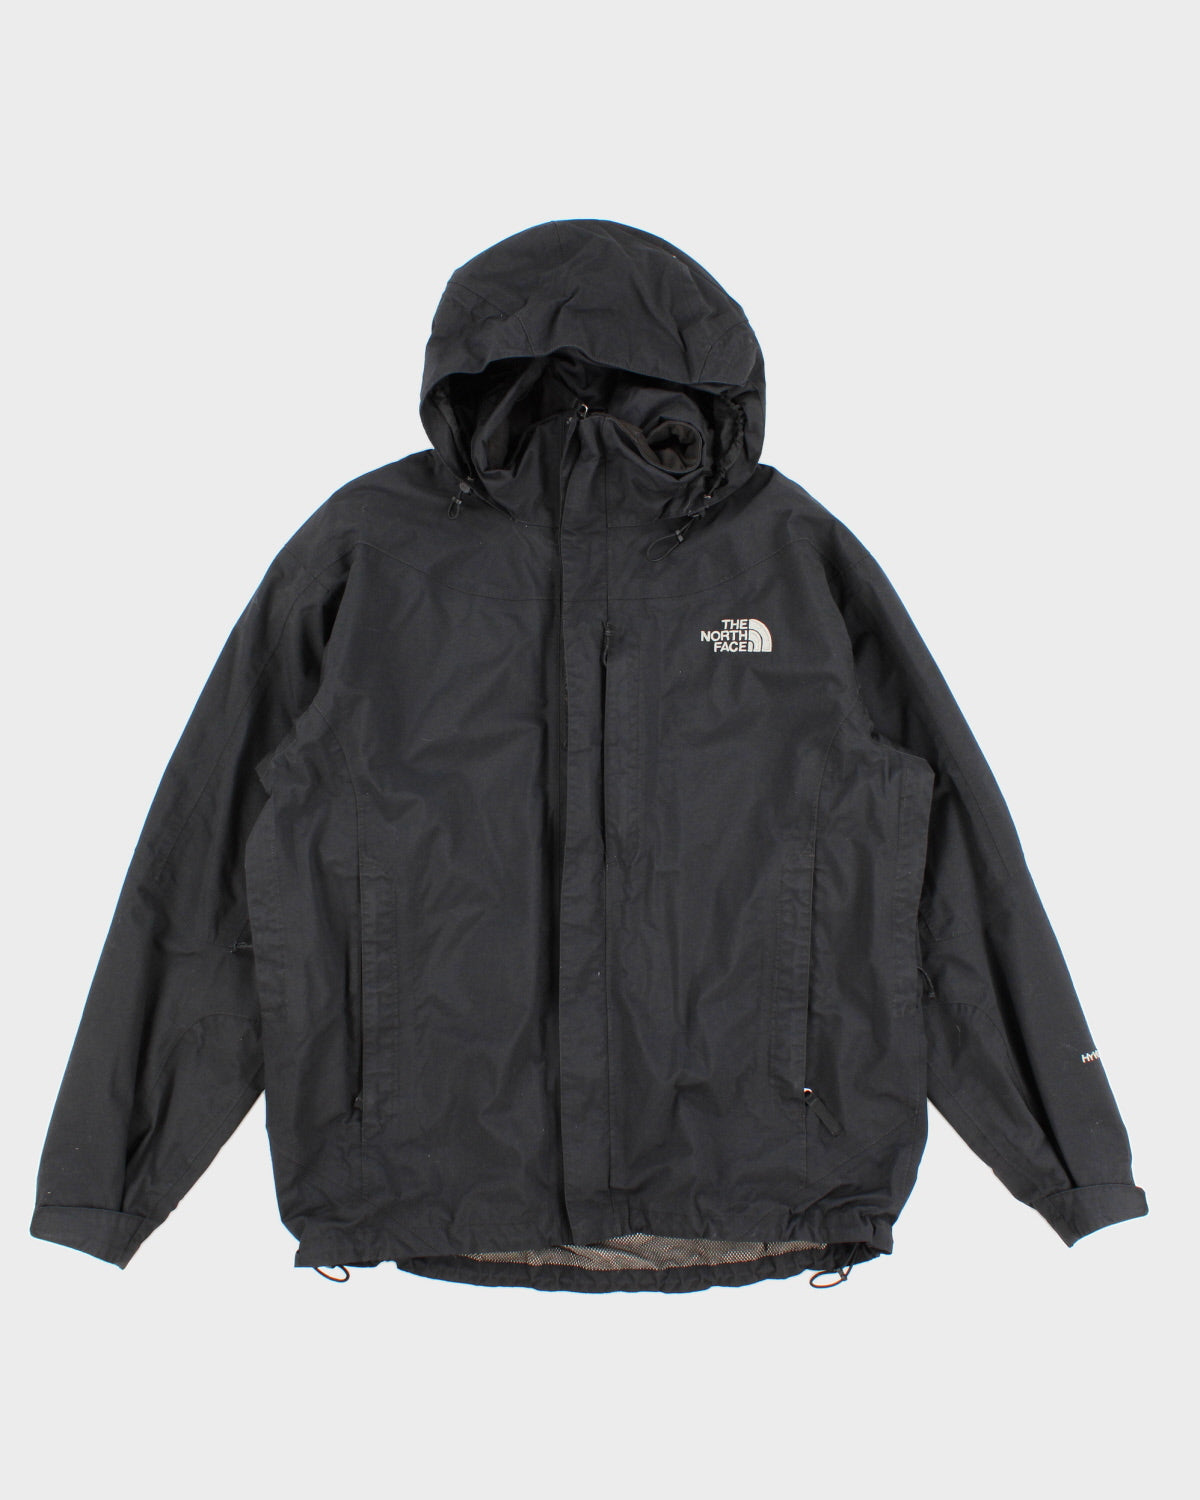 The North Face Hooded Black Jacket - M